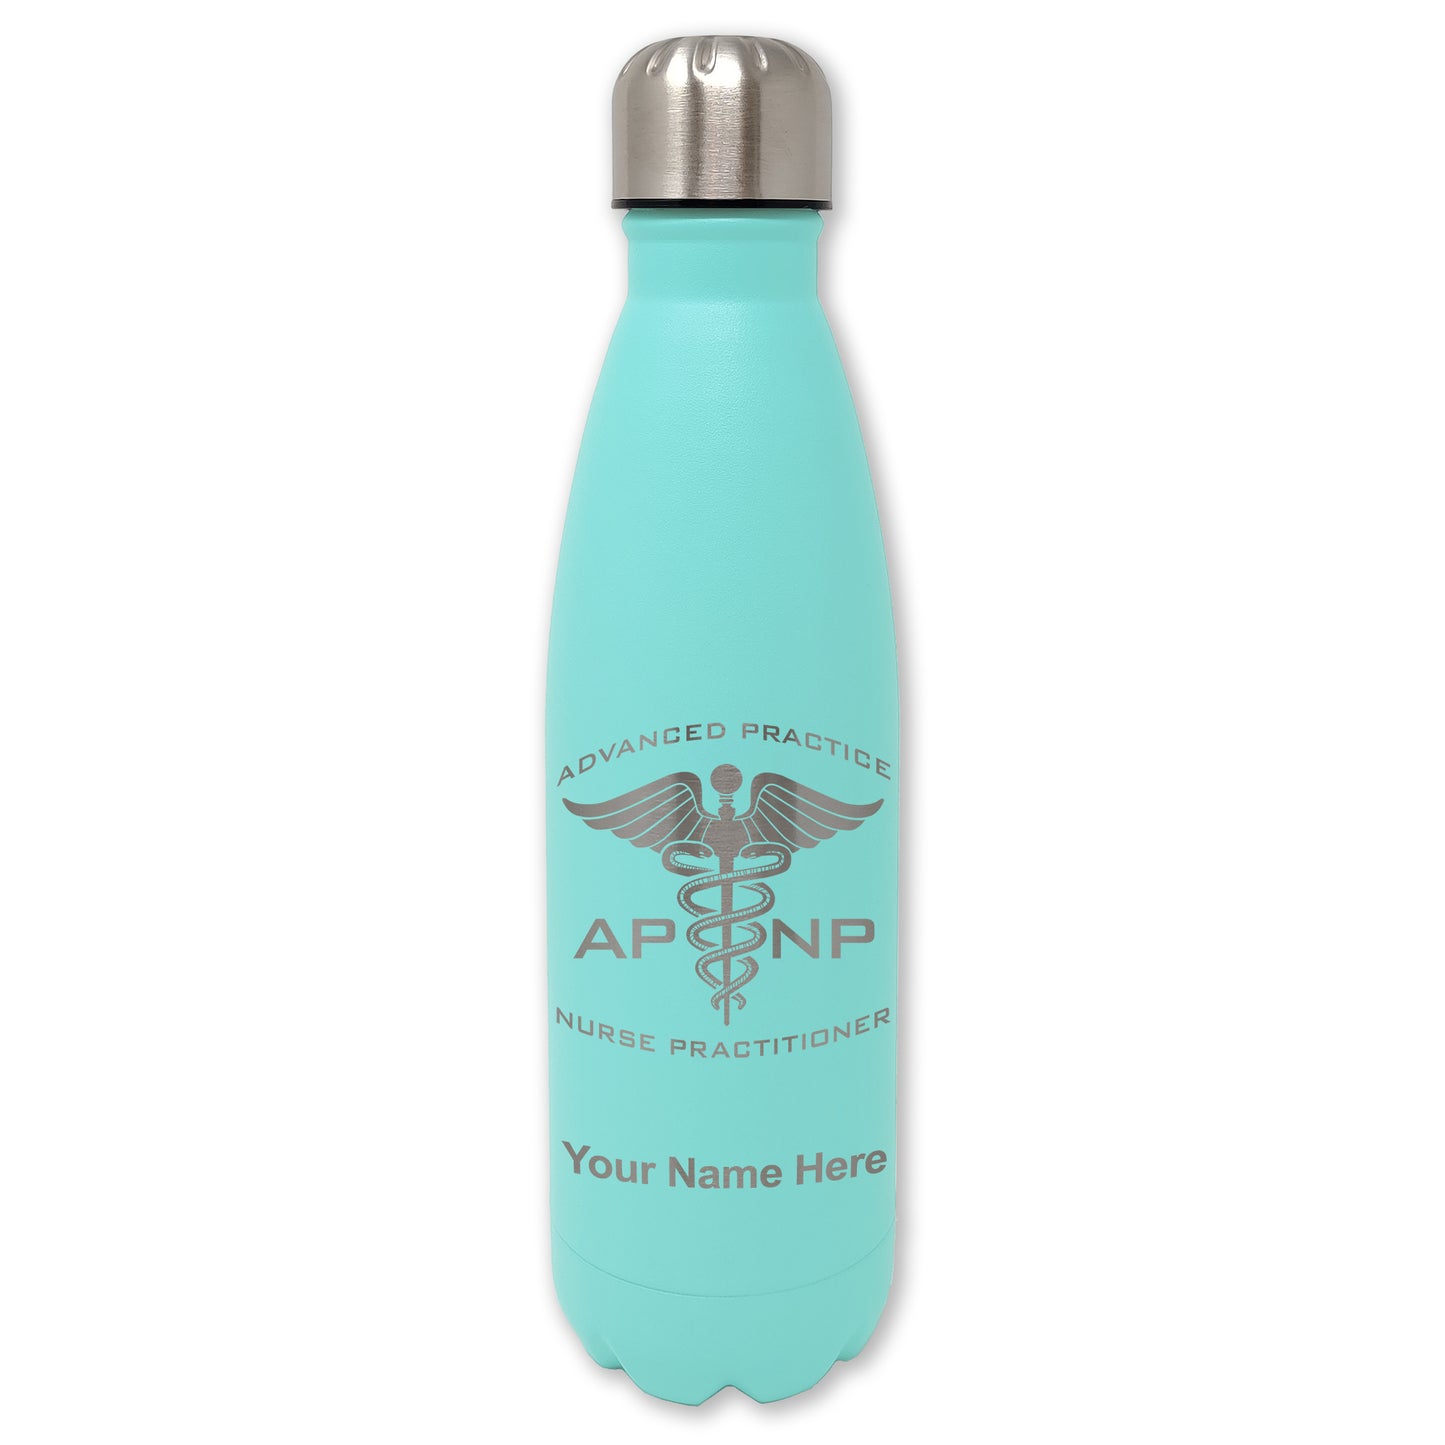 LaserGram Double Wall Water Bottle, APNP Advanced Practice Nurse Practitioner, Personalized Engraving Included